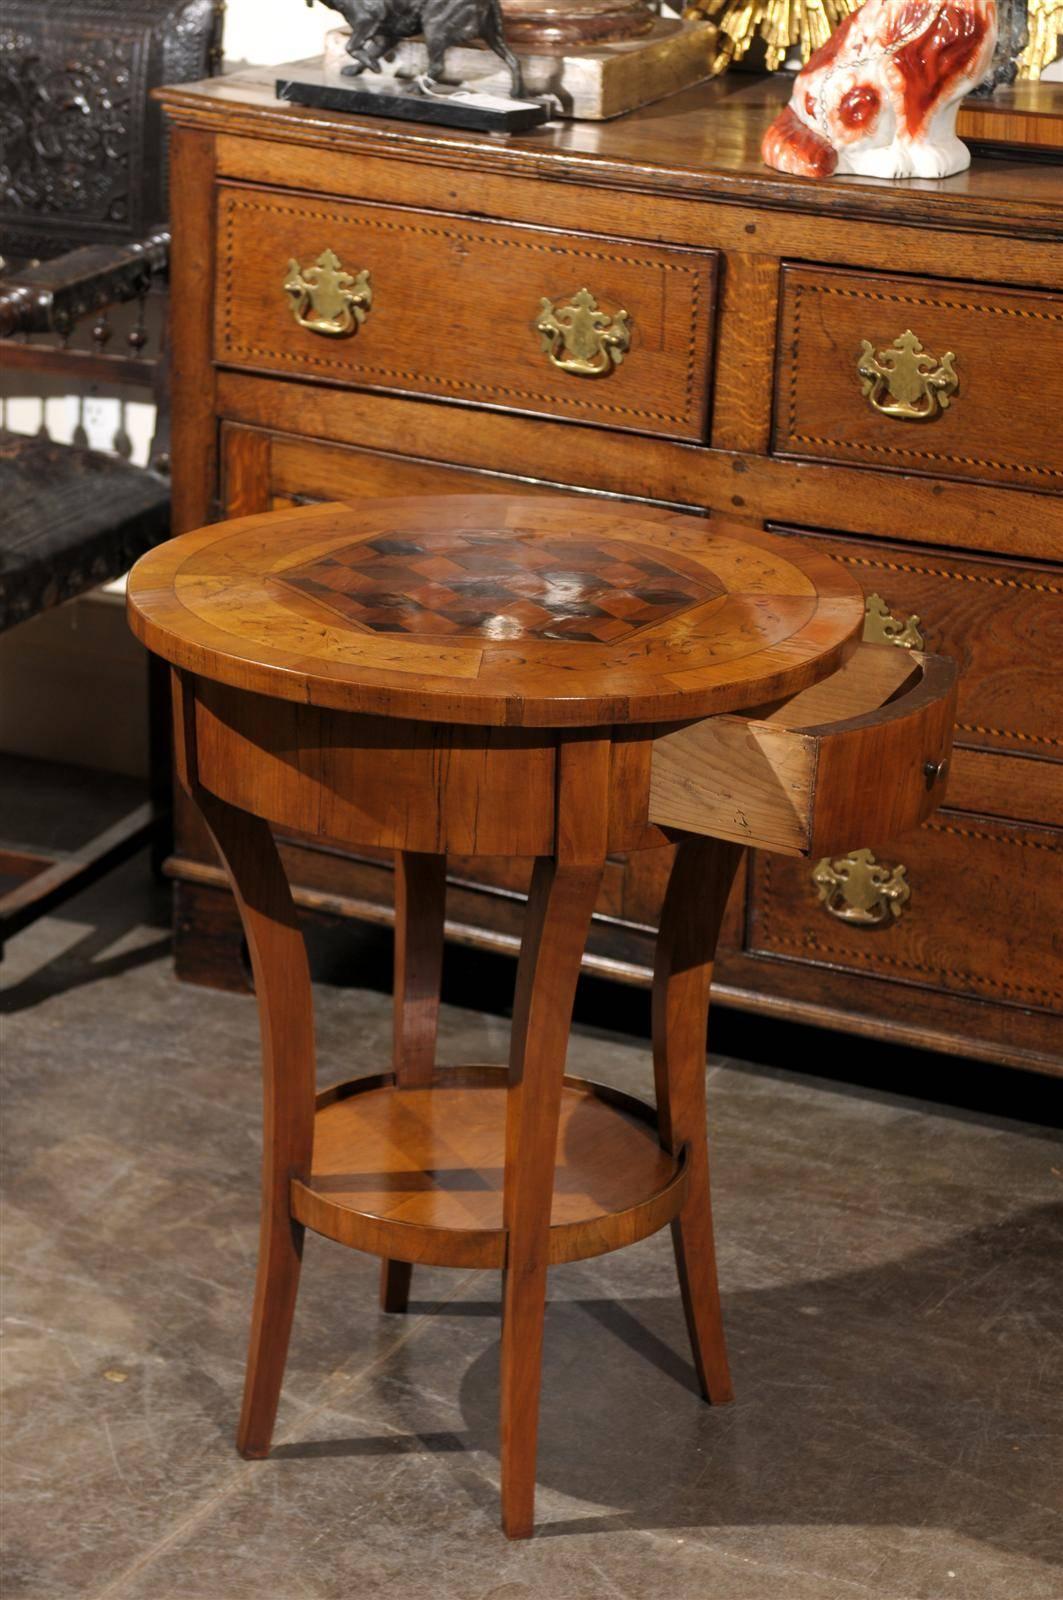 Italian Round Side Table with Cube Parquetry Inlay from the Early 19th Century 2